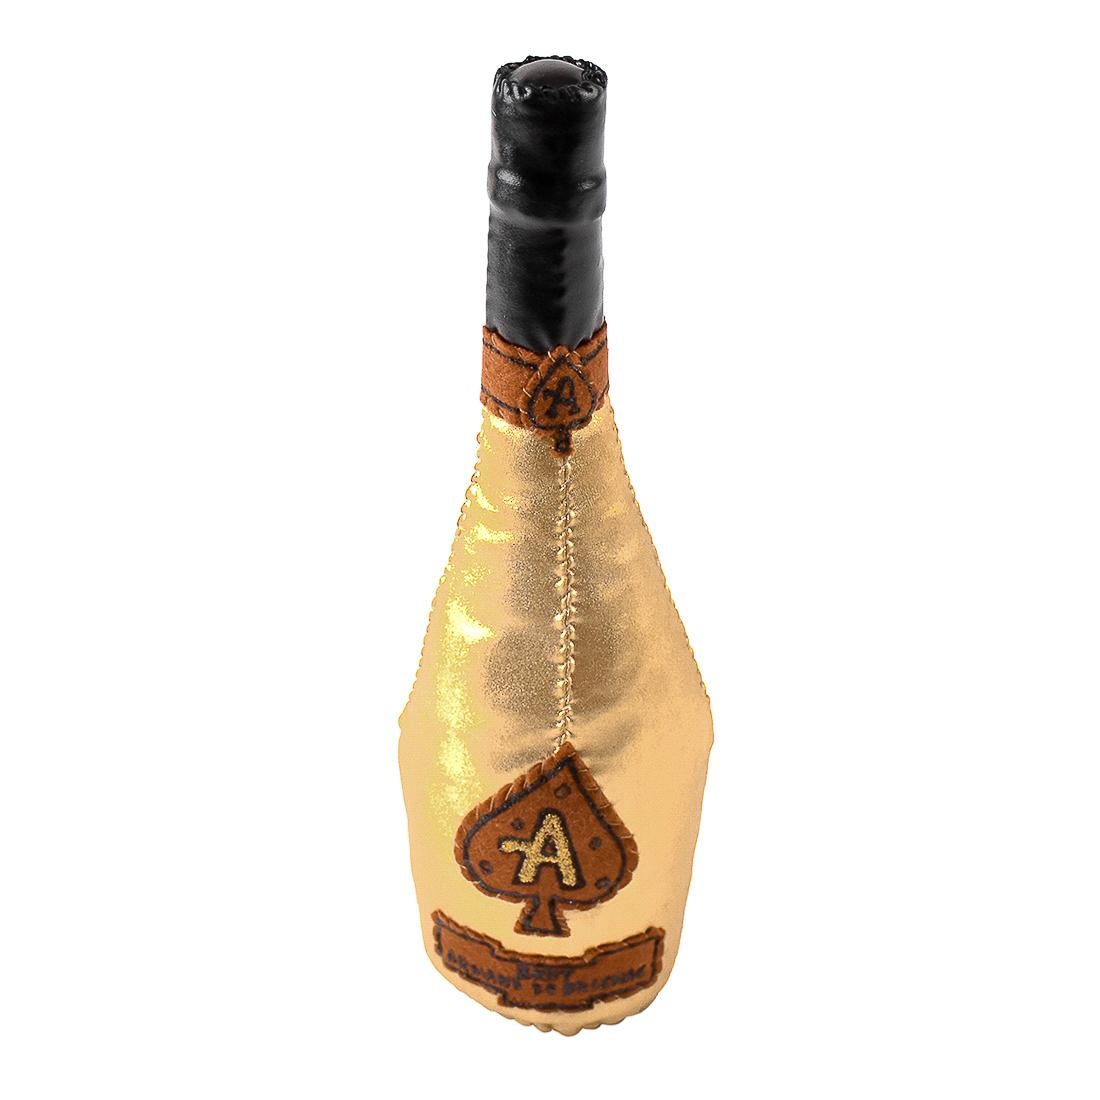 Sculpture is based on the Ace Of Spades Champagne bottle.
Hand made multiple by artist.
Hand signed with black ink by Lucy Sparrow on back of sculpture.
Label on bottle reads “Armand De Brignac”.
Gold fabric with brown and black felt.
Certificate of